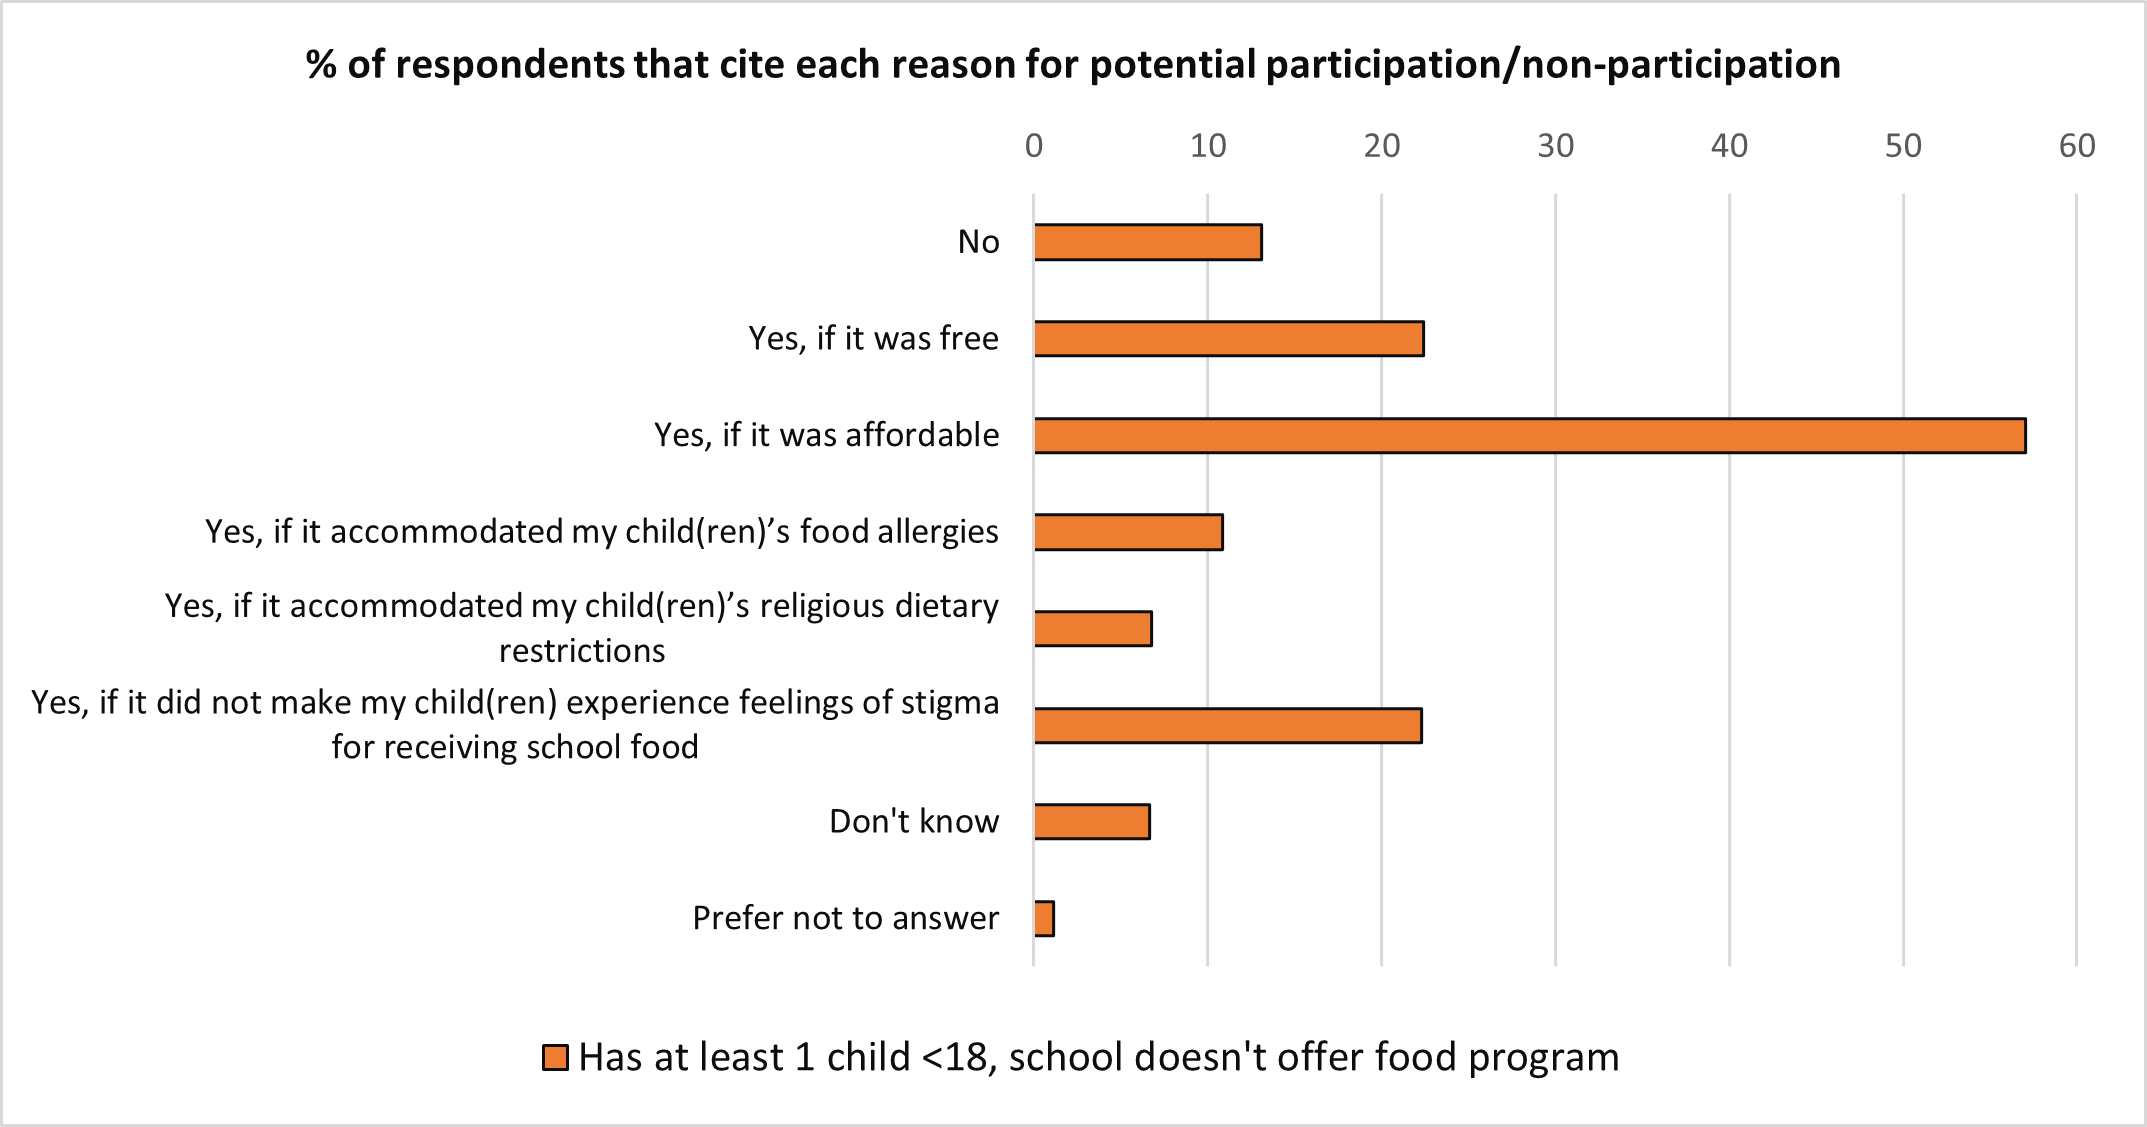 A bar chart of the percent of respondents that cite each reason for potential participation/non-participation. Text version below.